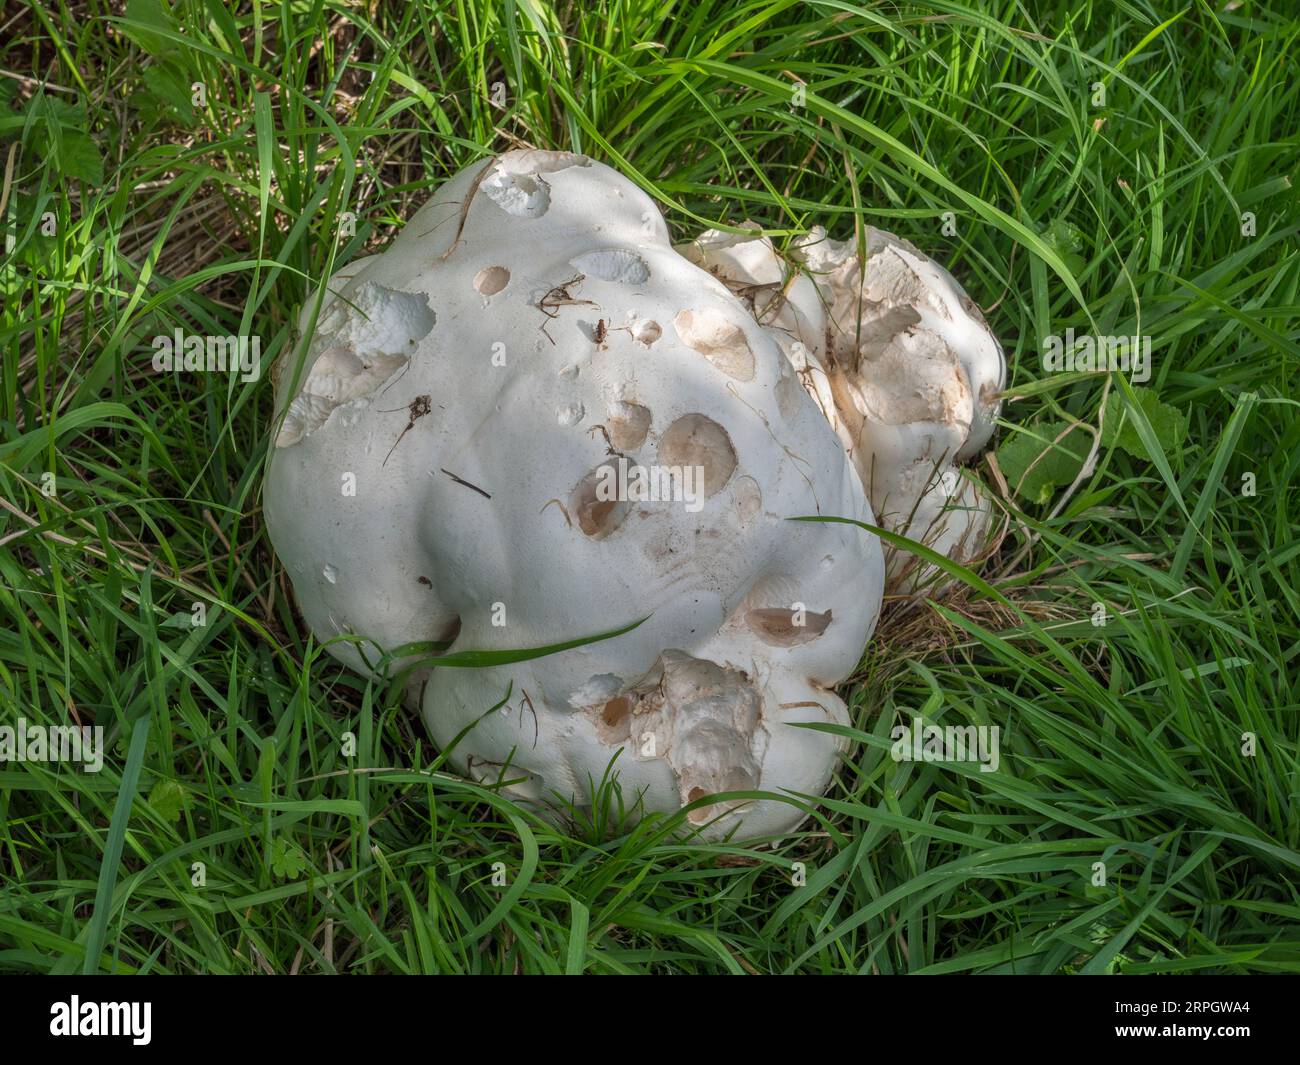 A pot marked Giant Puffball, (Calvatia gigantea) fungus growing in the grass in Stock Photo